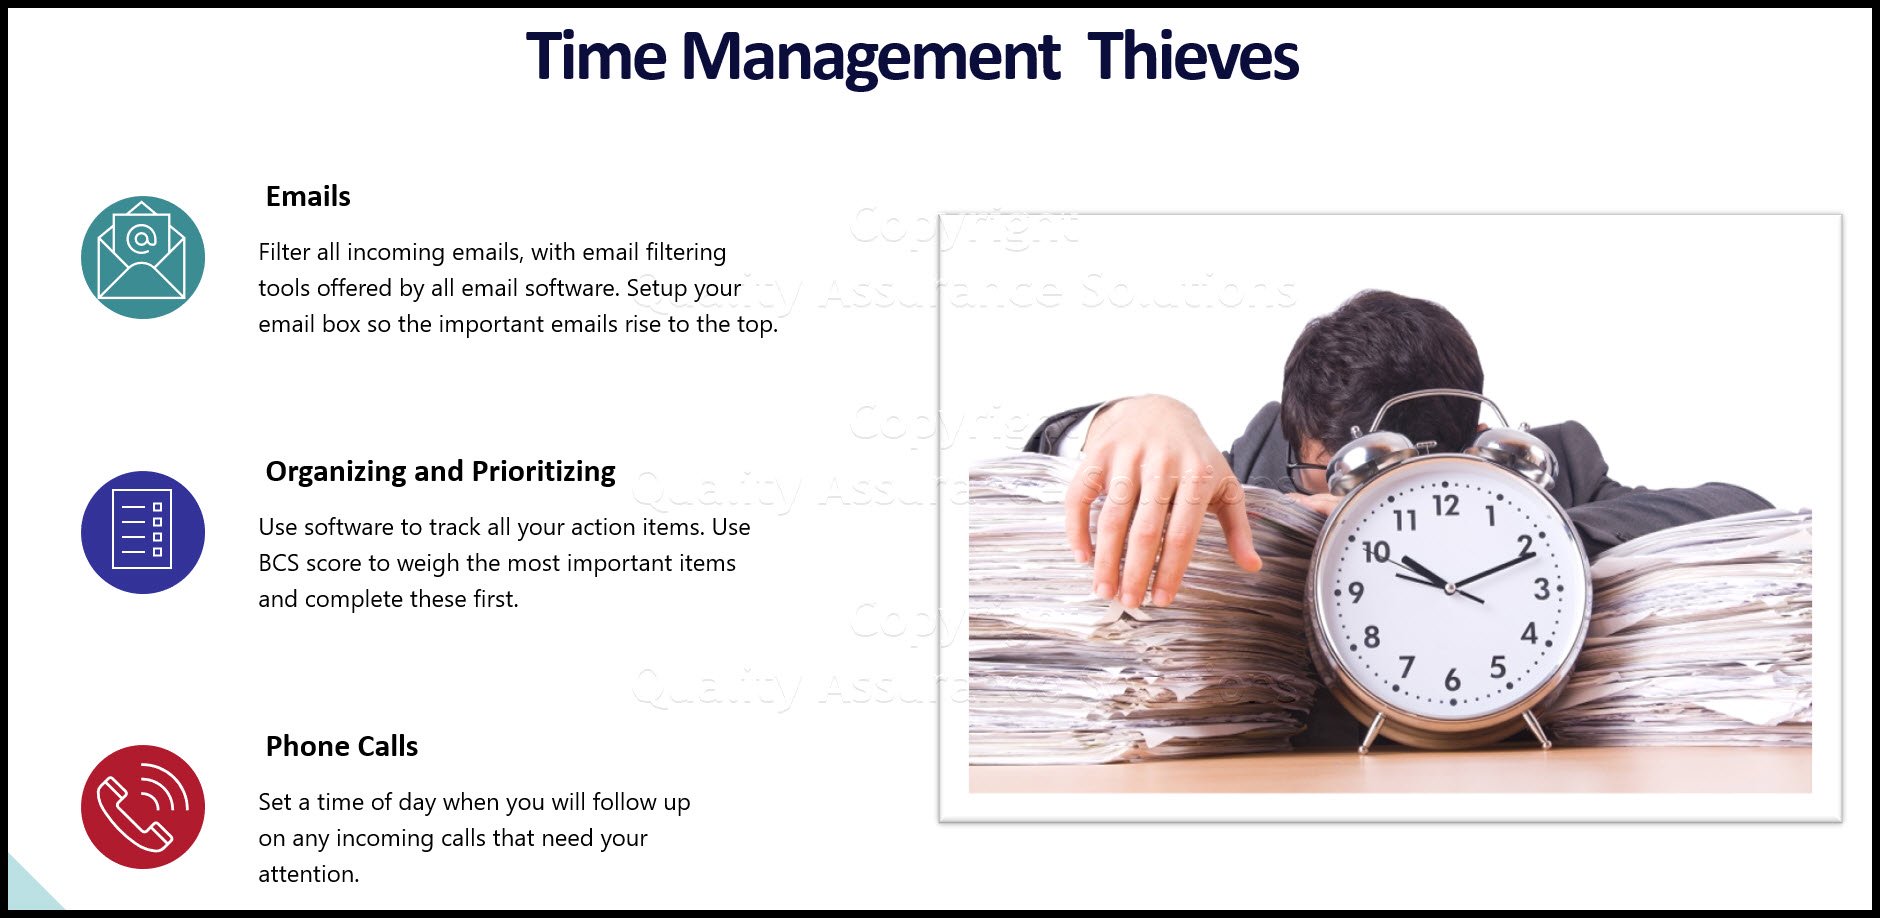 Three tips to improve time management skills include attacking the time thief, halting interuptions, and priortizing by streamlining